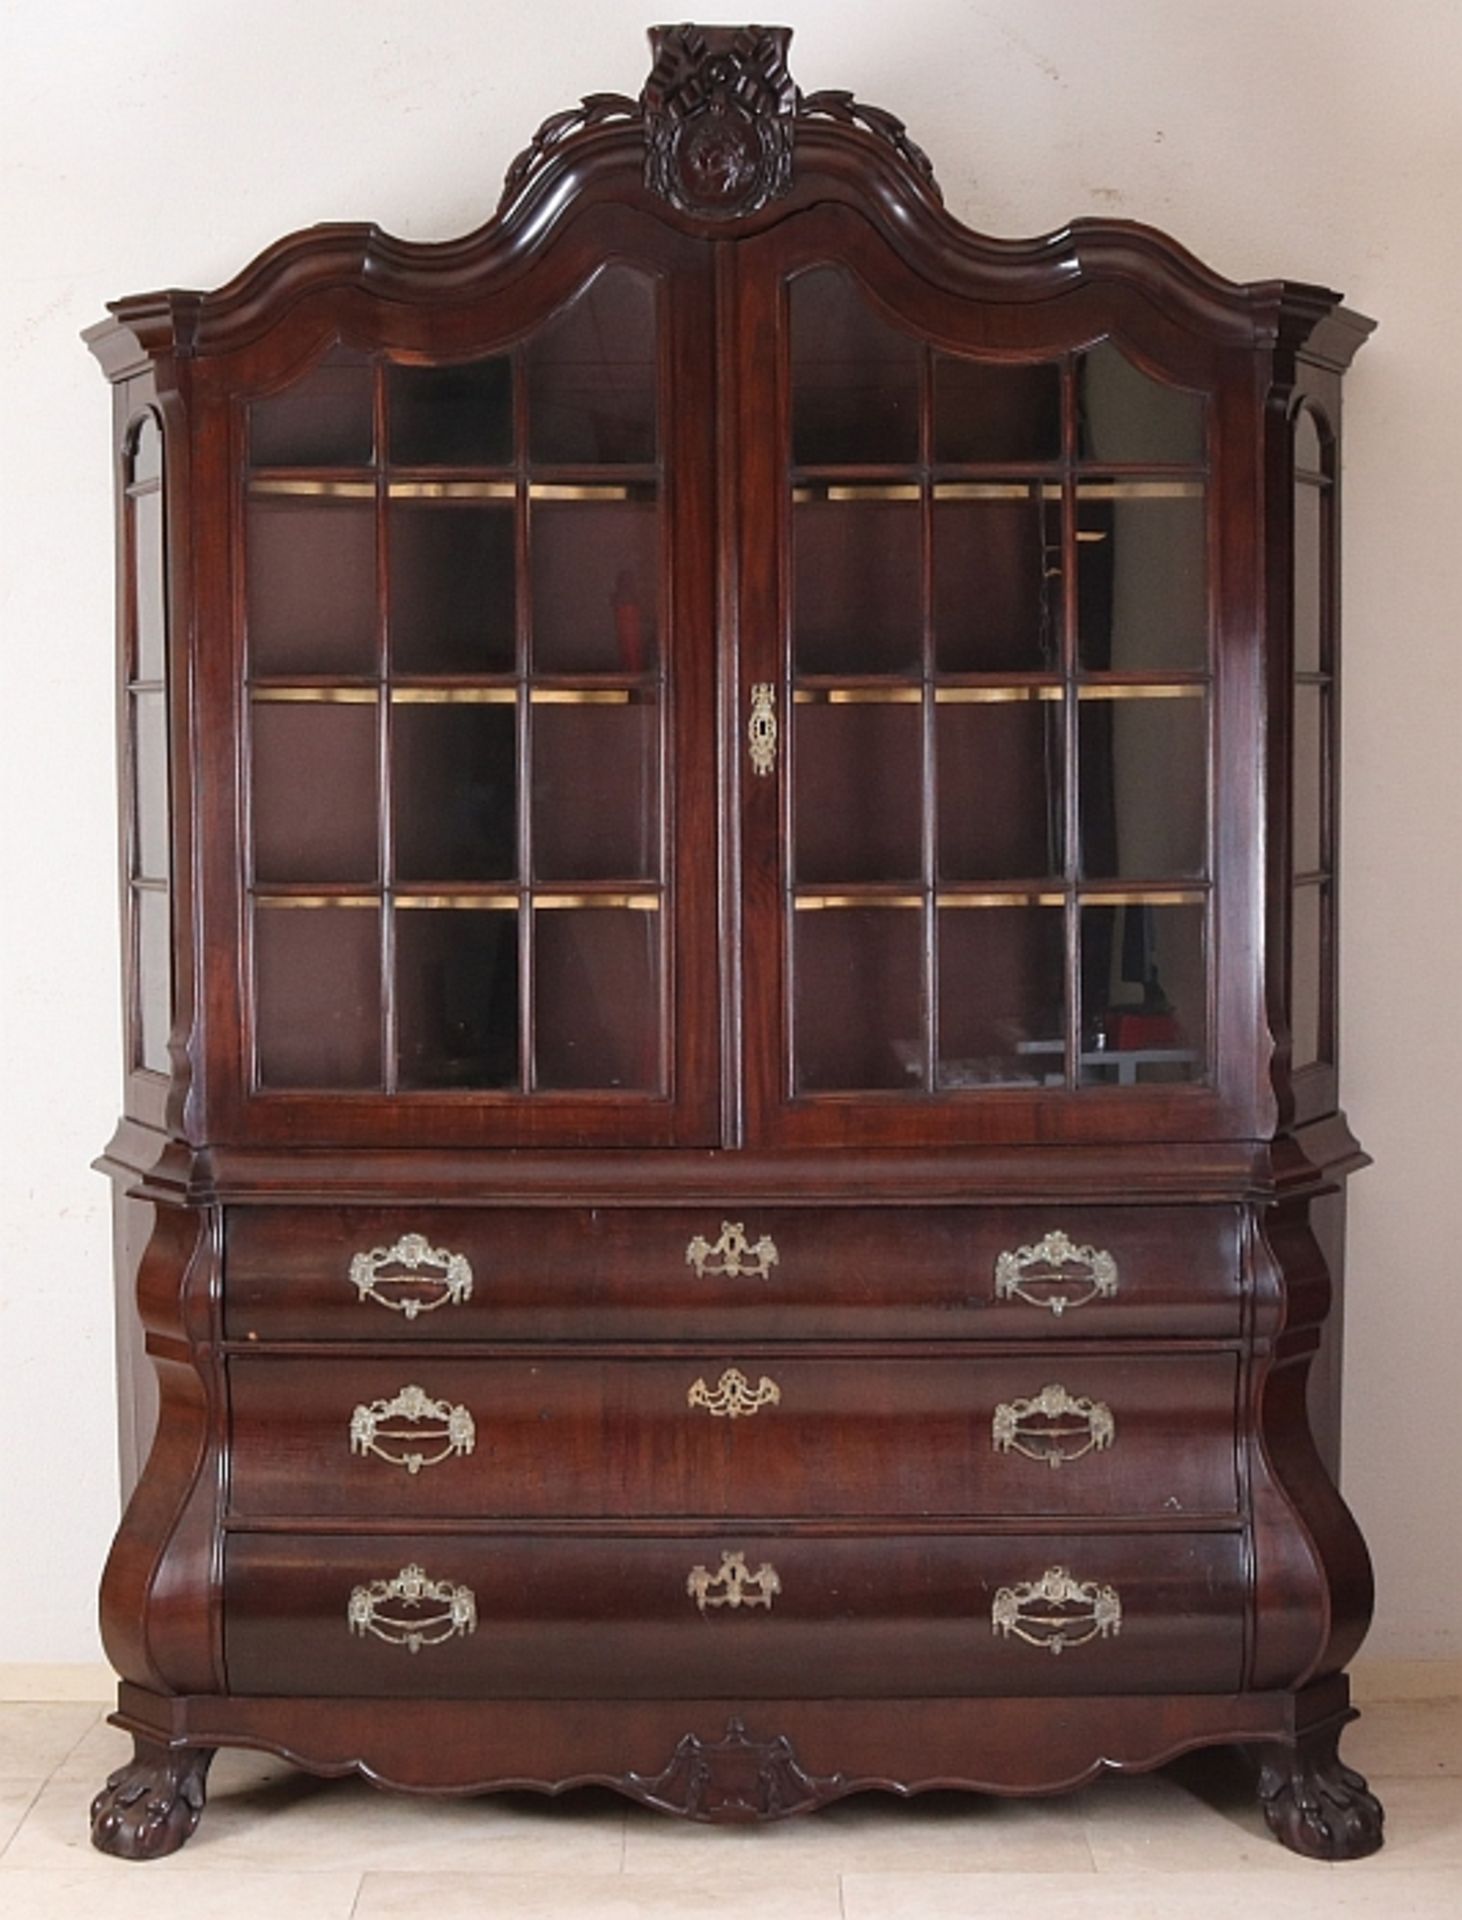 Dutch Baroque mahogany cabinet with beautiful bronze fittings and claw feet. China cabinet.